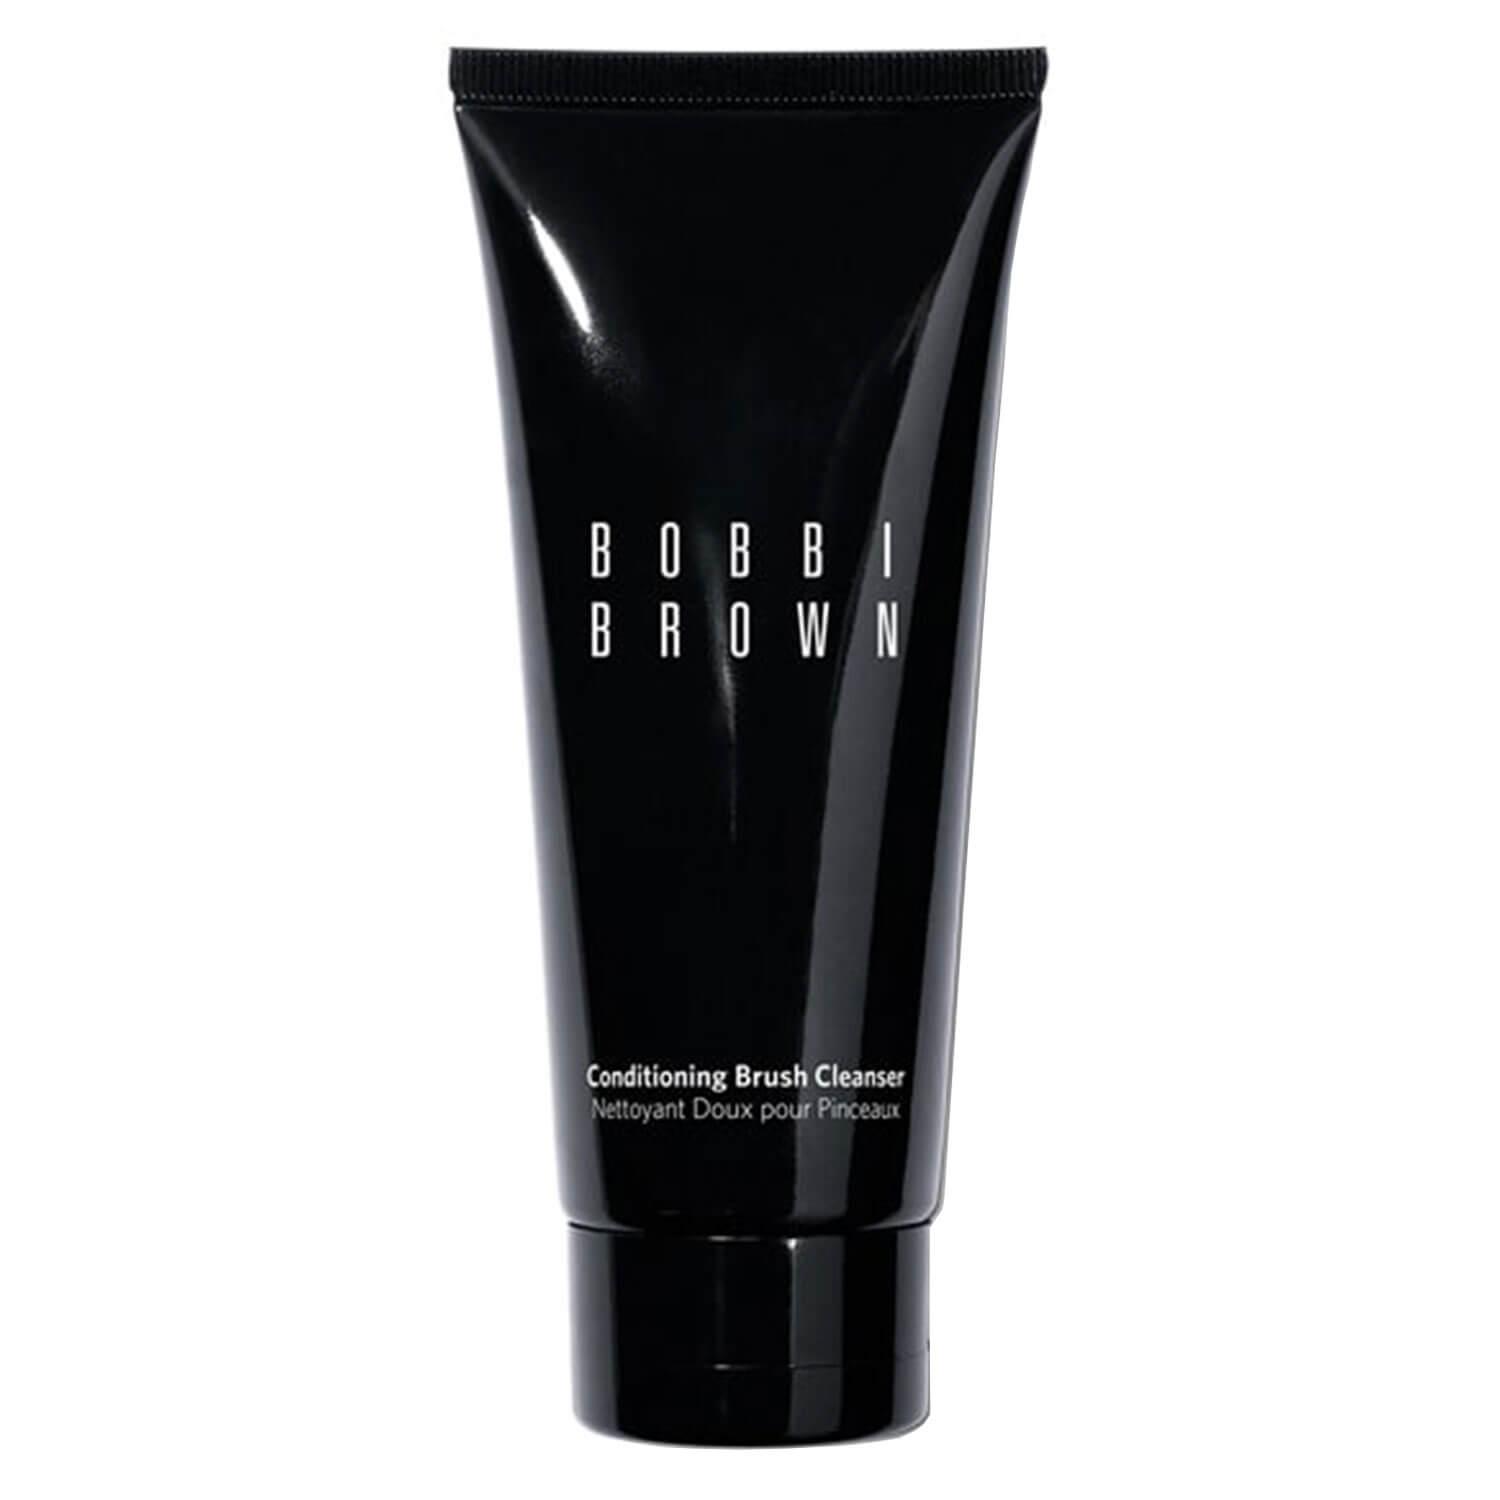 BB Tools - Conditioning Brush Cleanser